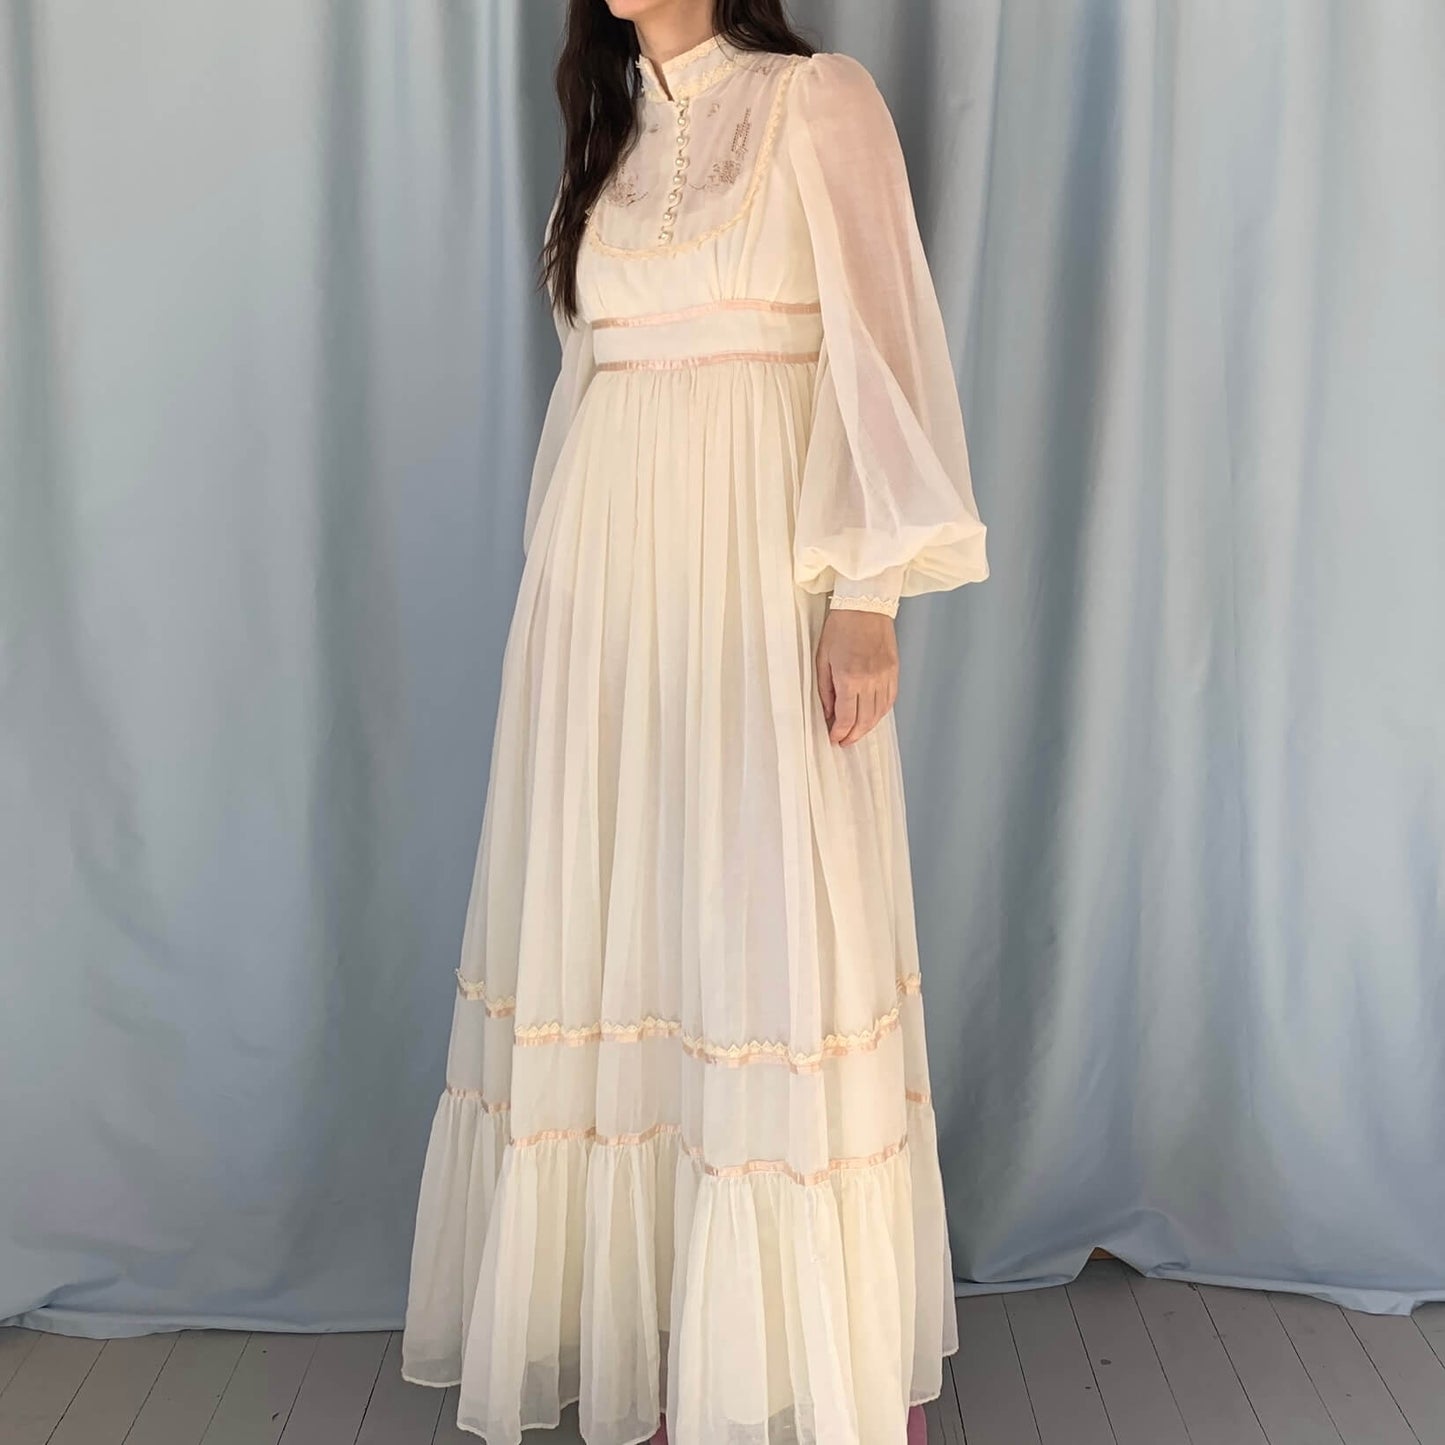 70s Gunne Sax Wedding Dress in ivory cotton in front of a blue backdrop